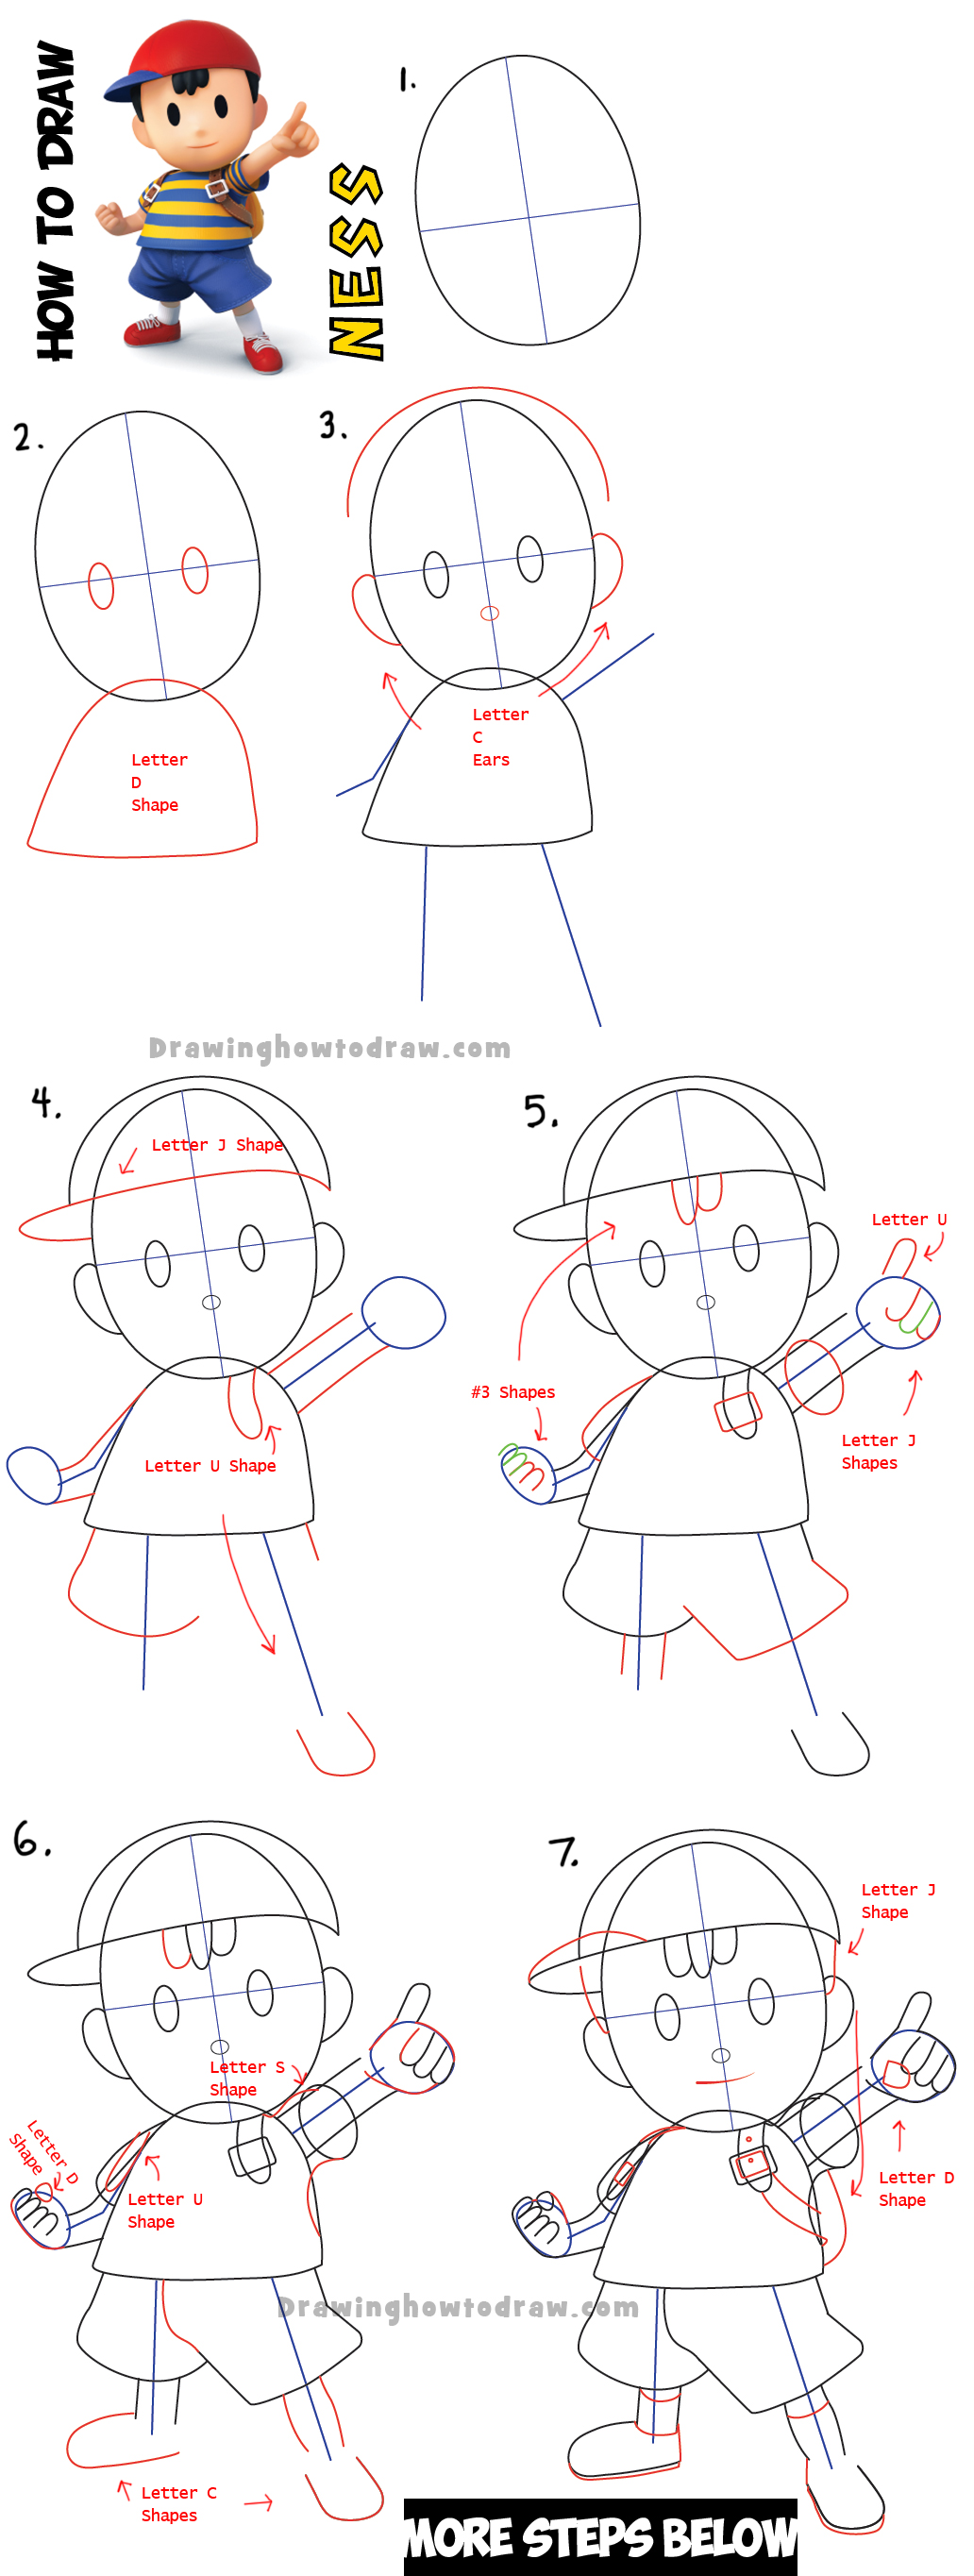 How to Draw Ness from Super Smash Bros with Simple Step by Step Drawing Lesson